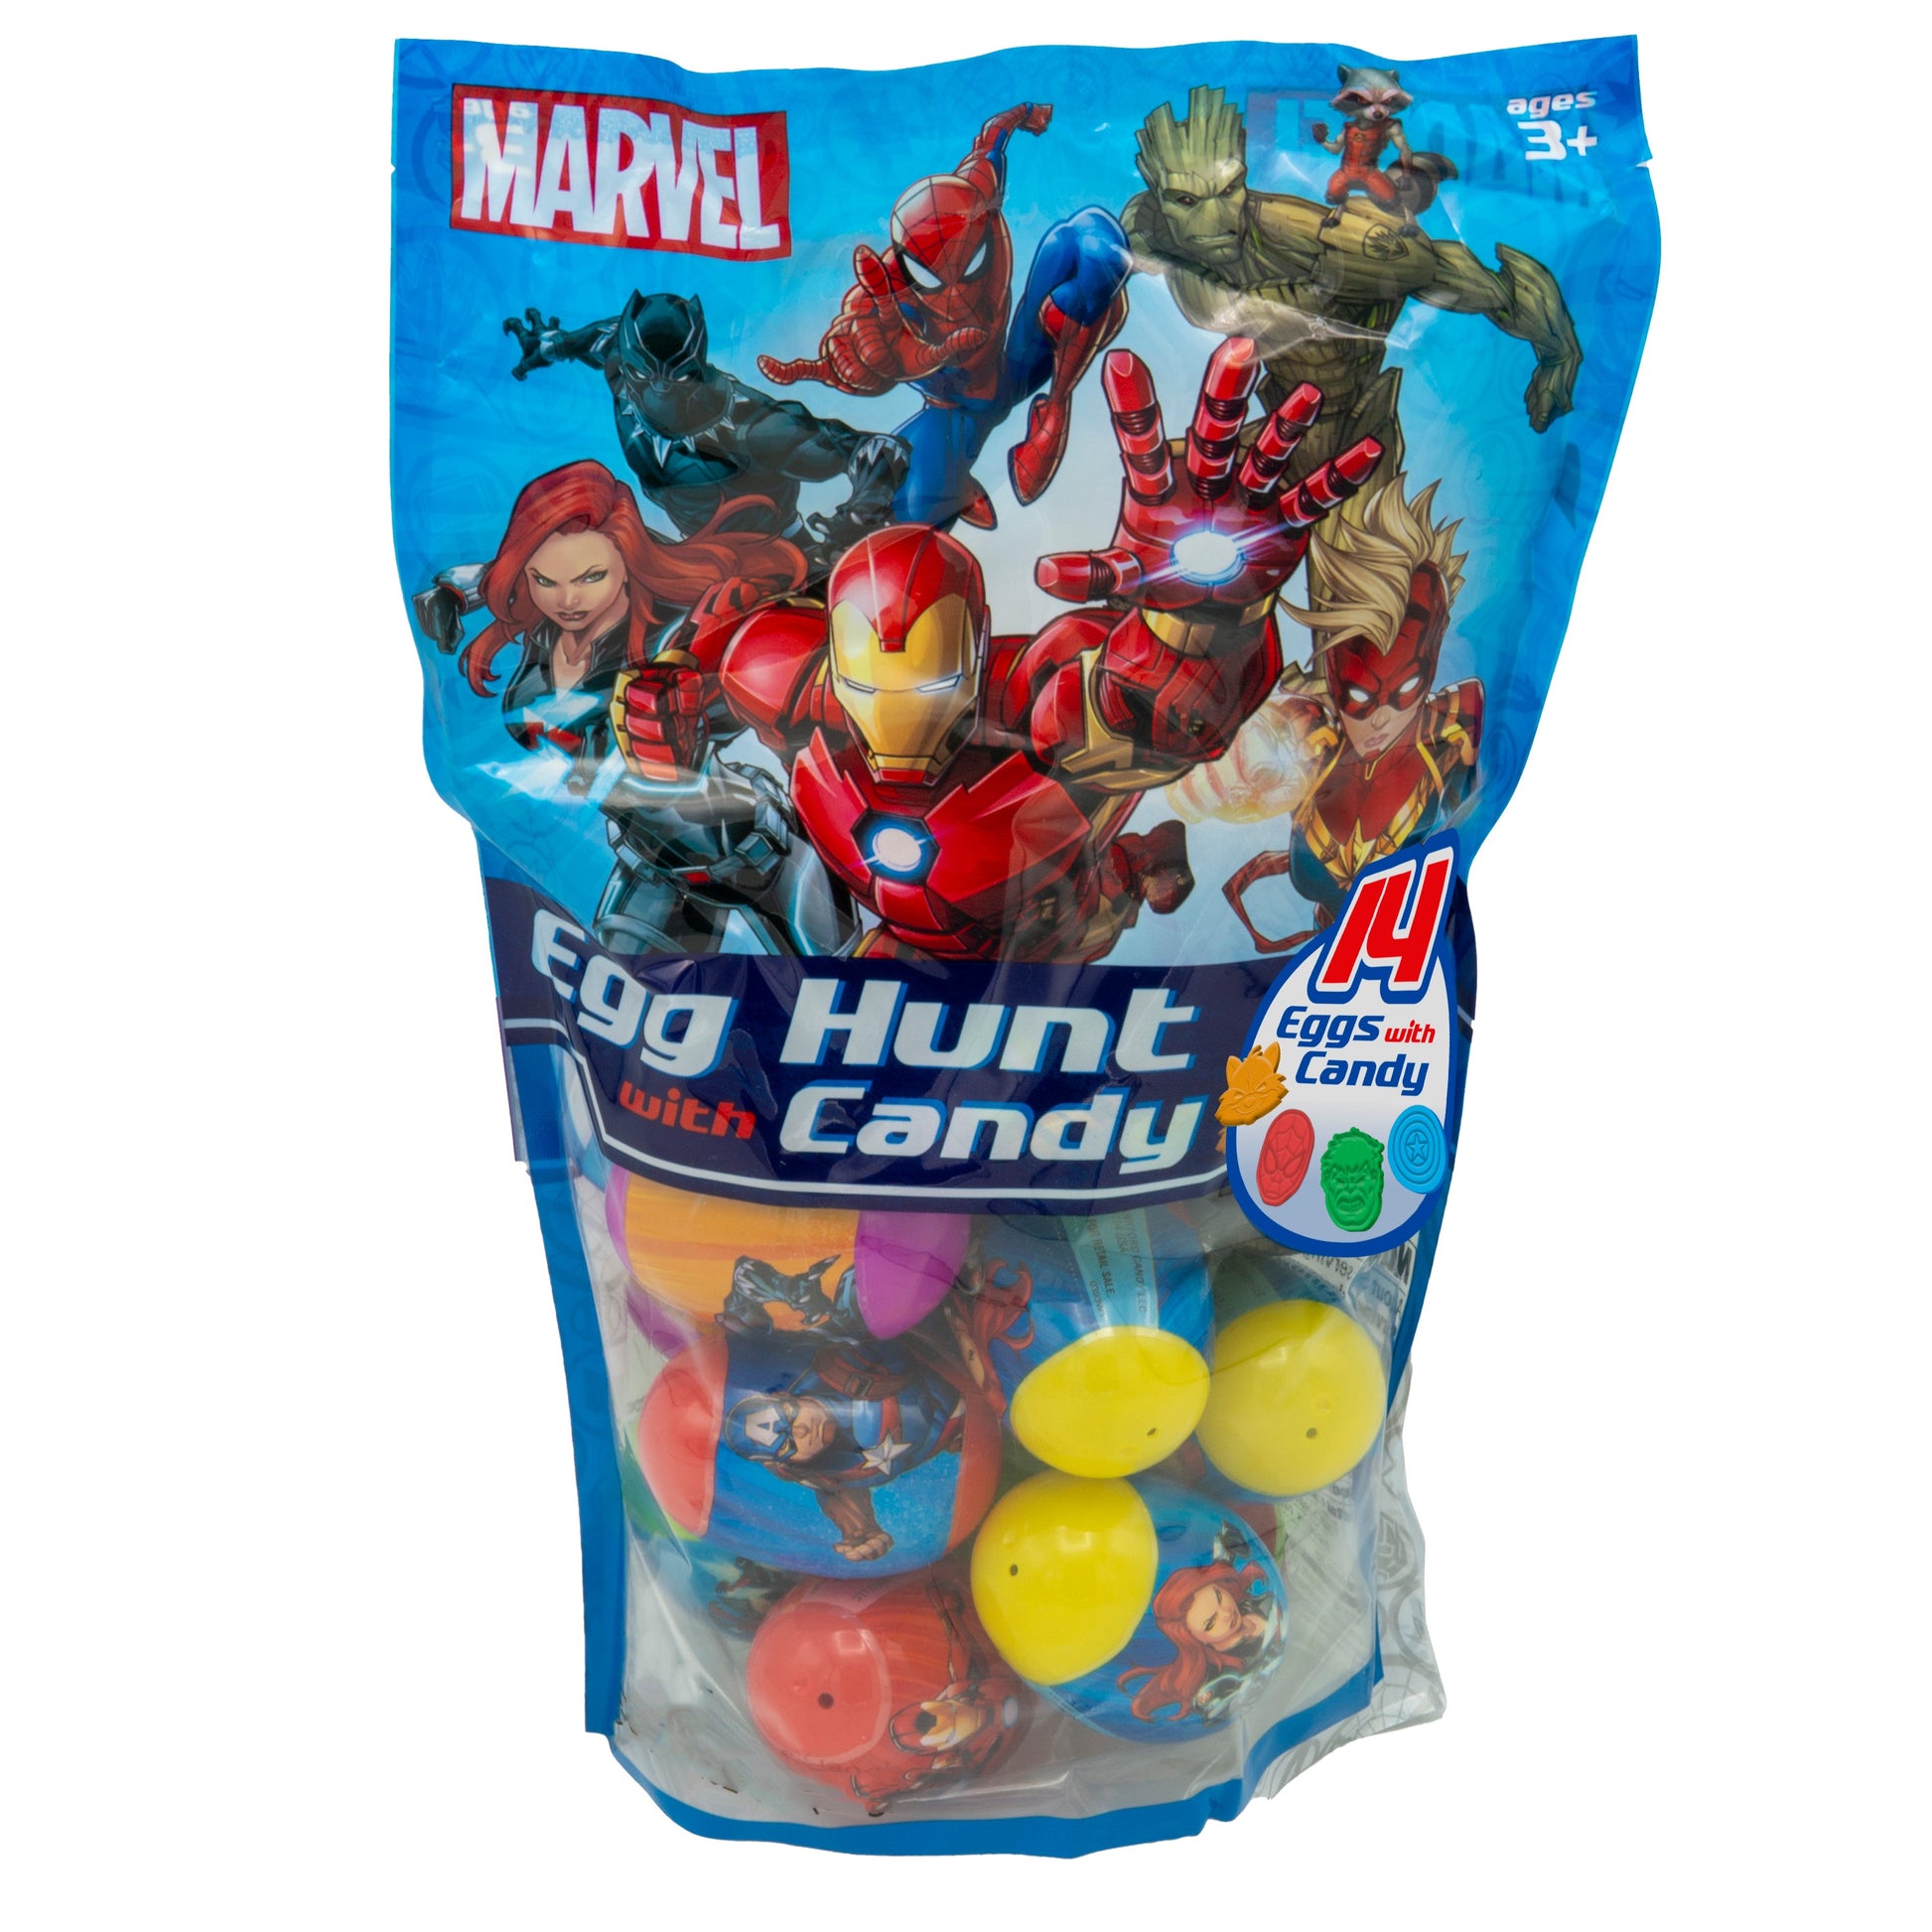 Blue bag with Marvel heroes and plastic eggs